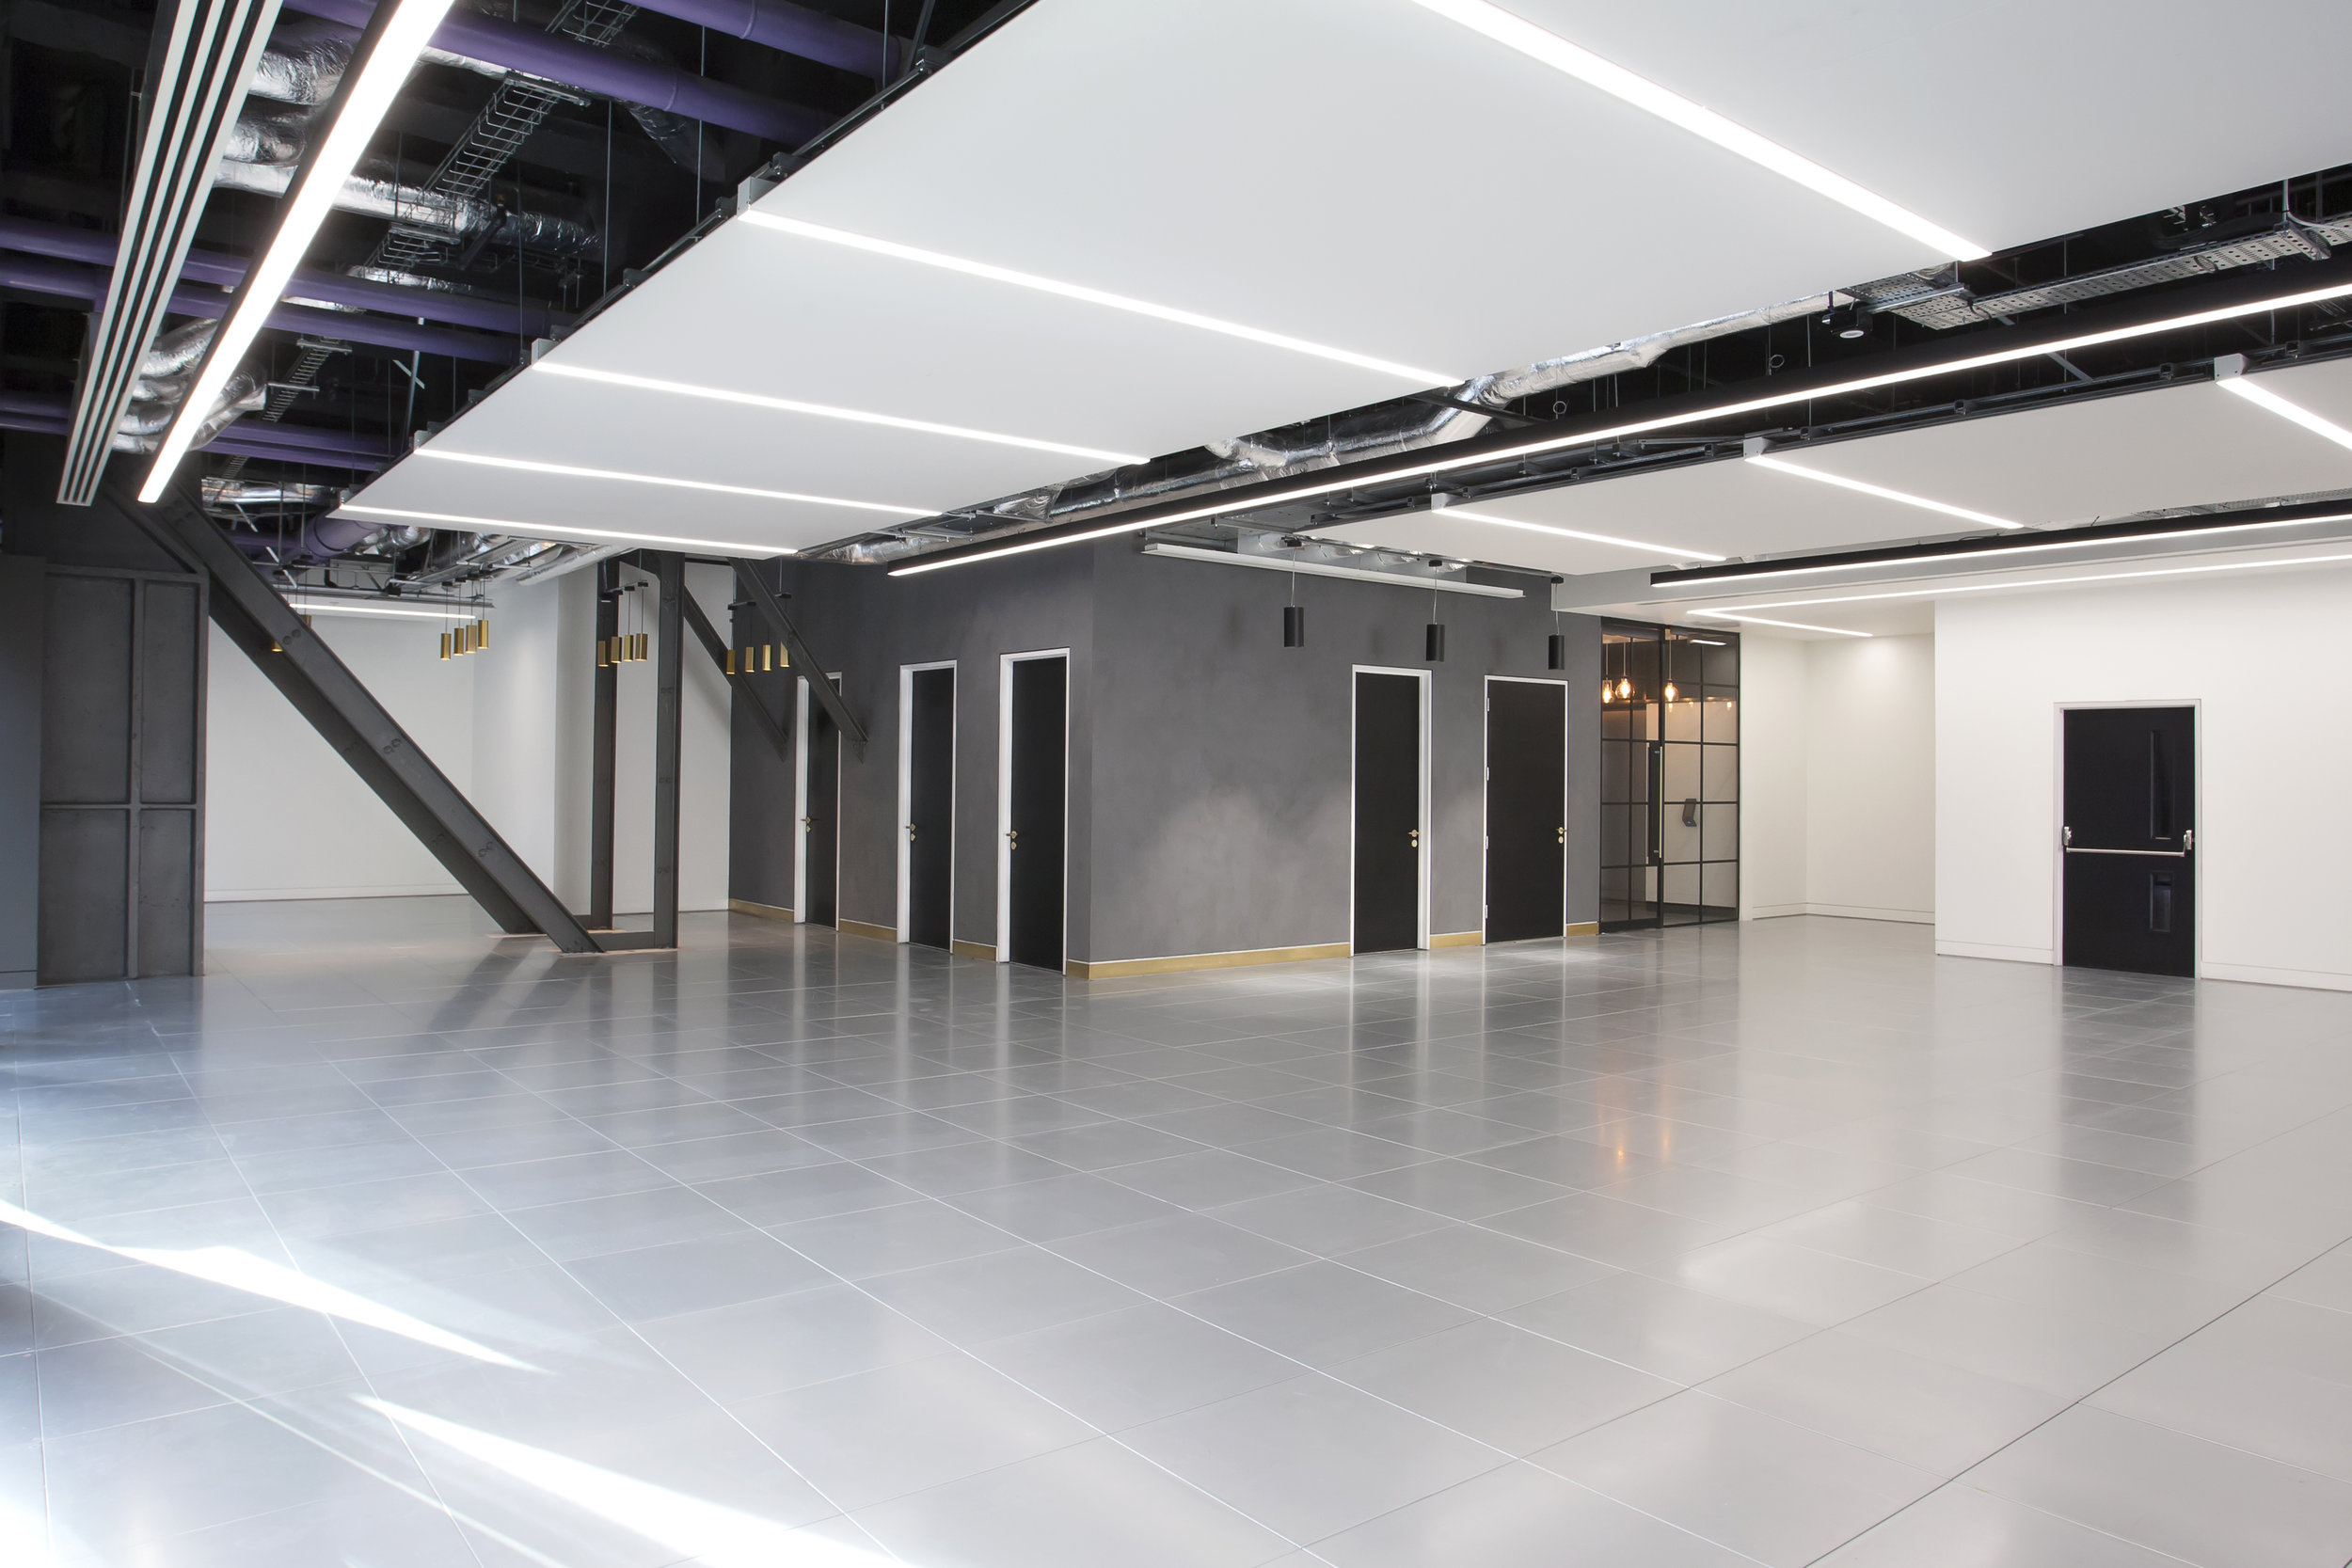 Premium city CAT A office fitout with an industrial feel at 80 Cannon Street, London.